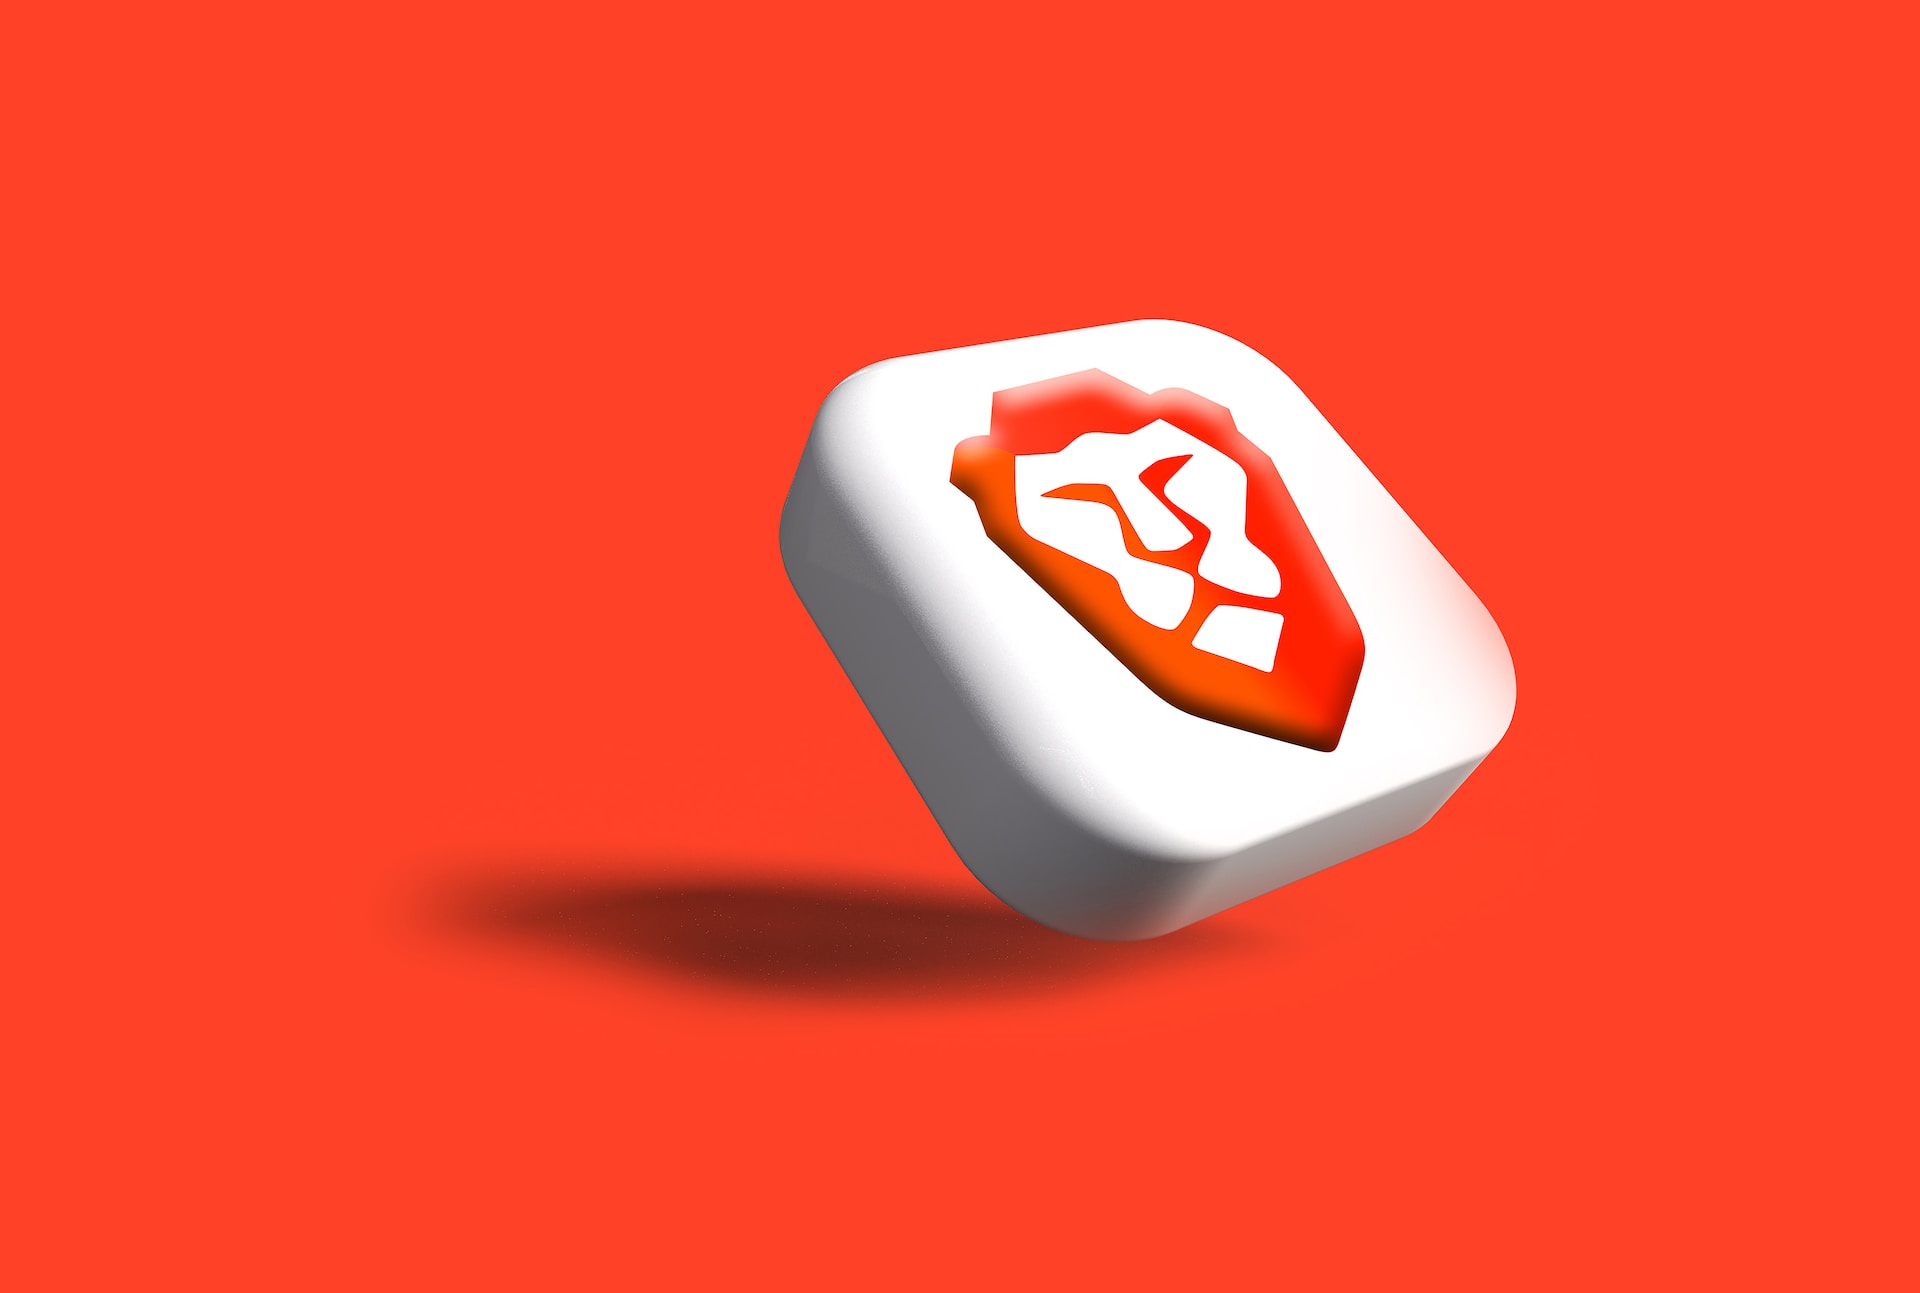 The orange-and-white lion face icon of Brave browser in a white squircle against a solid orange background